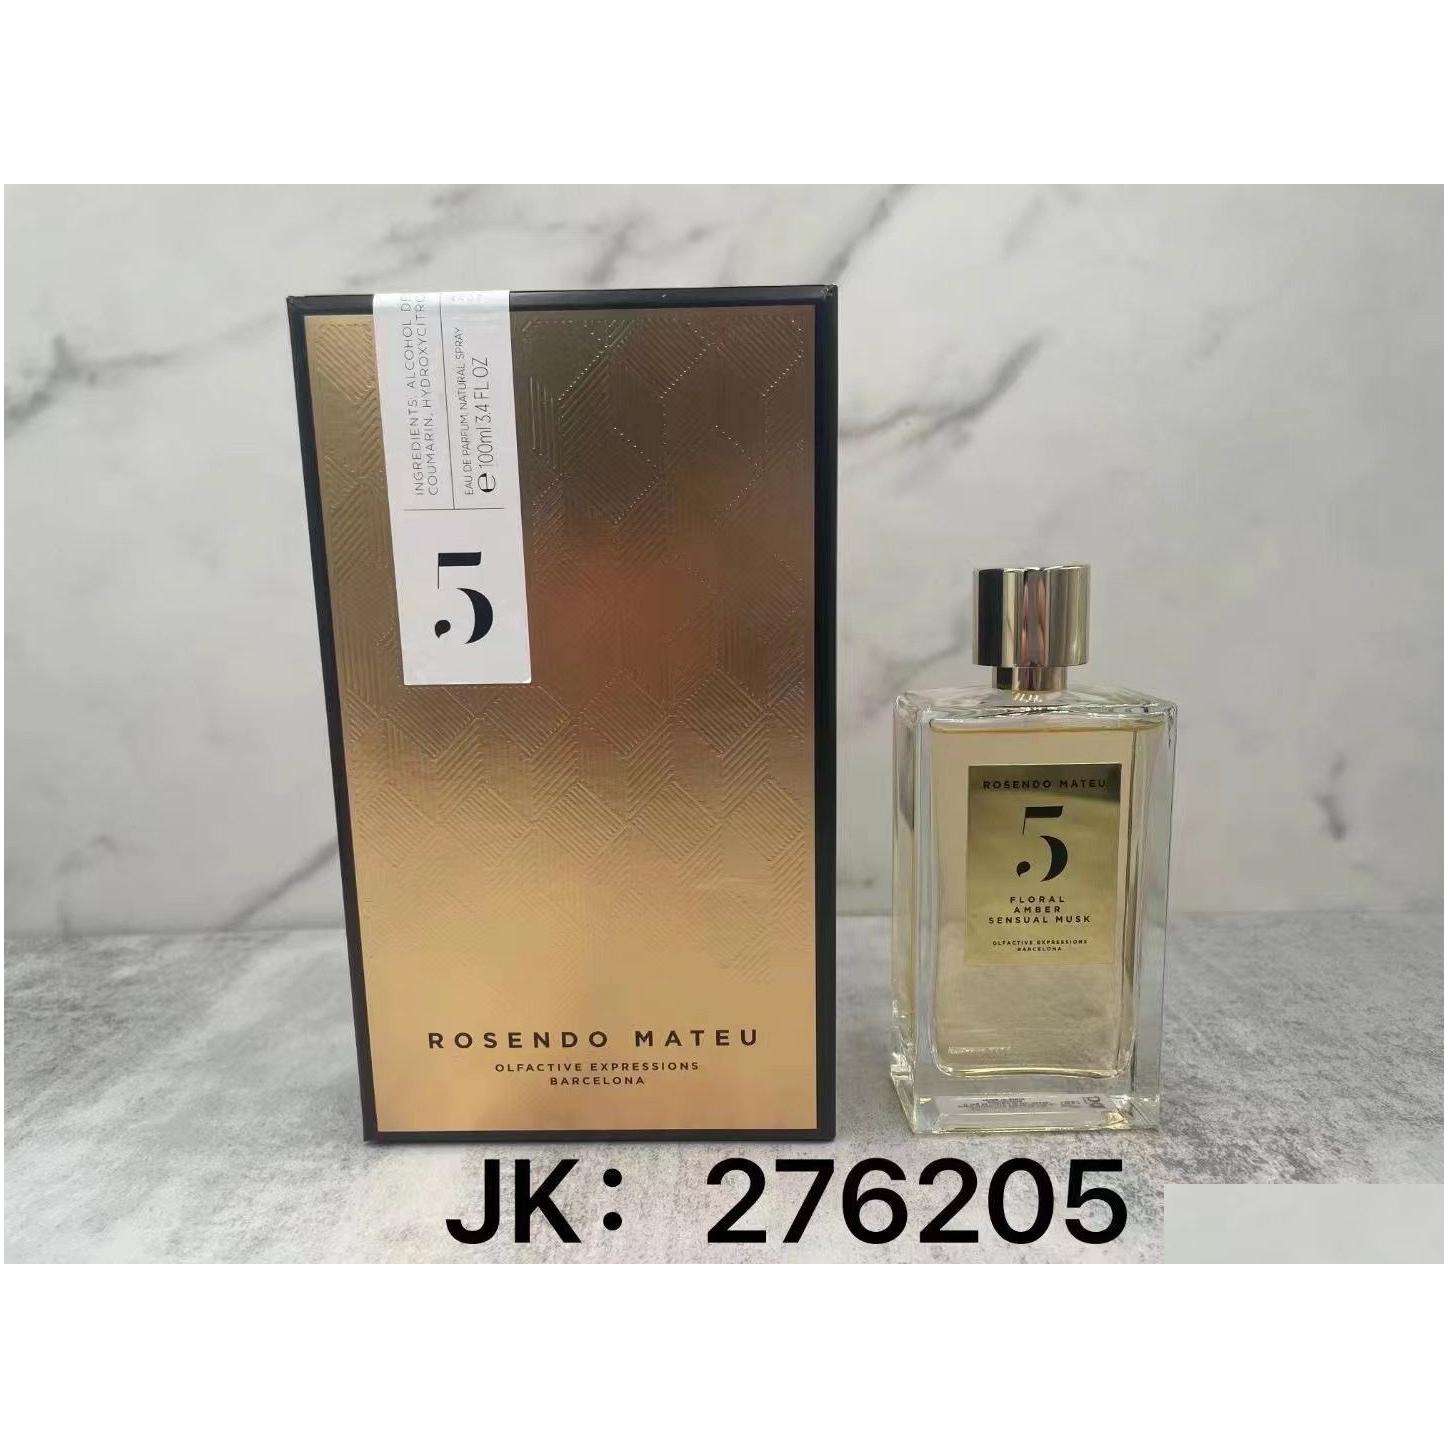 women perfume 100ml rosendo mateu olfactive expressions r n5 floral amber sensual musk eau de parfum cologne spray mazing smell long time lasting